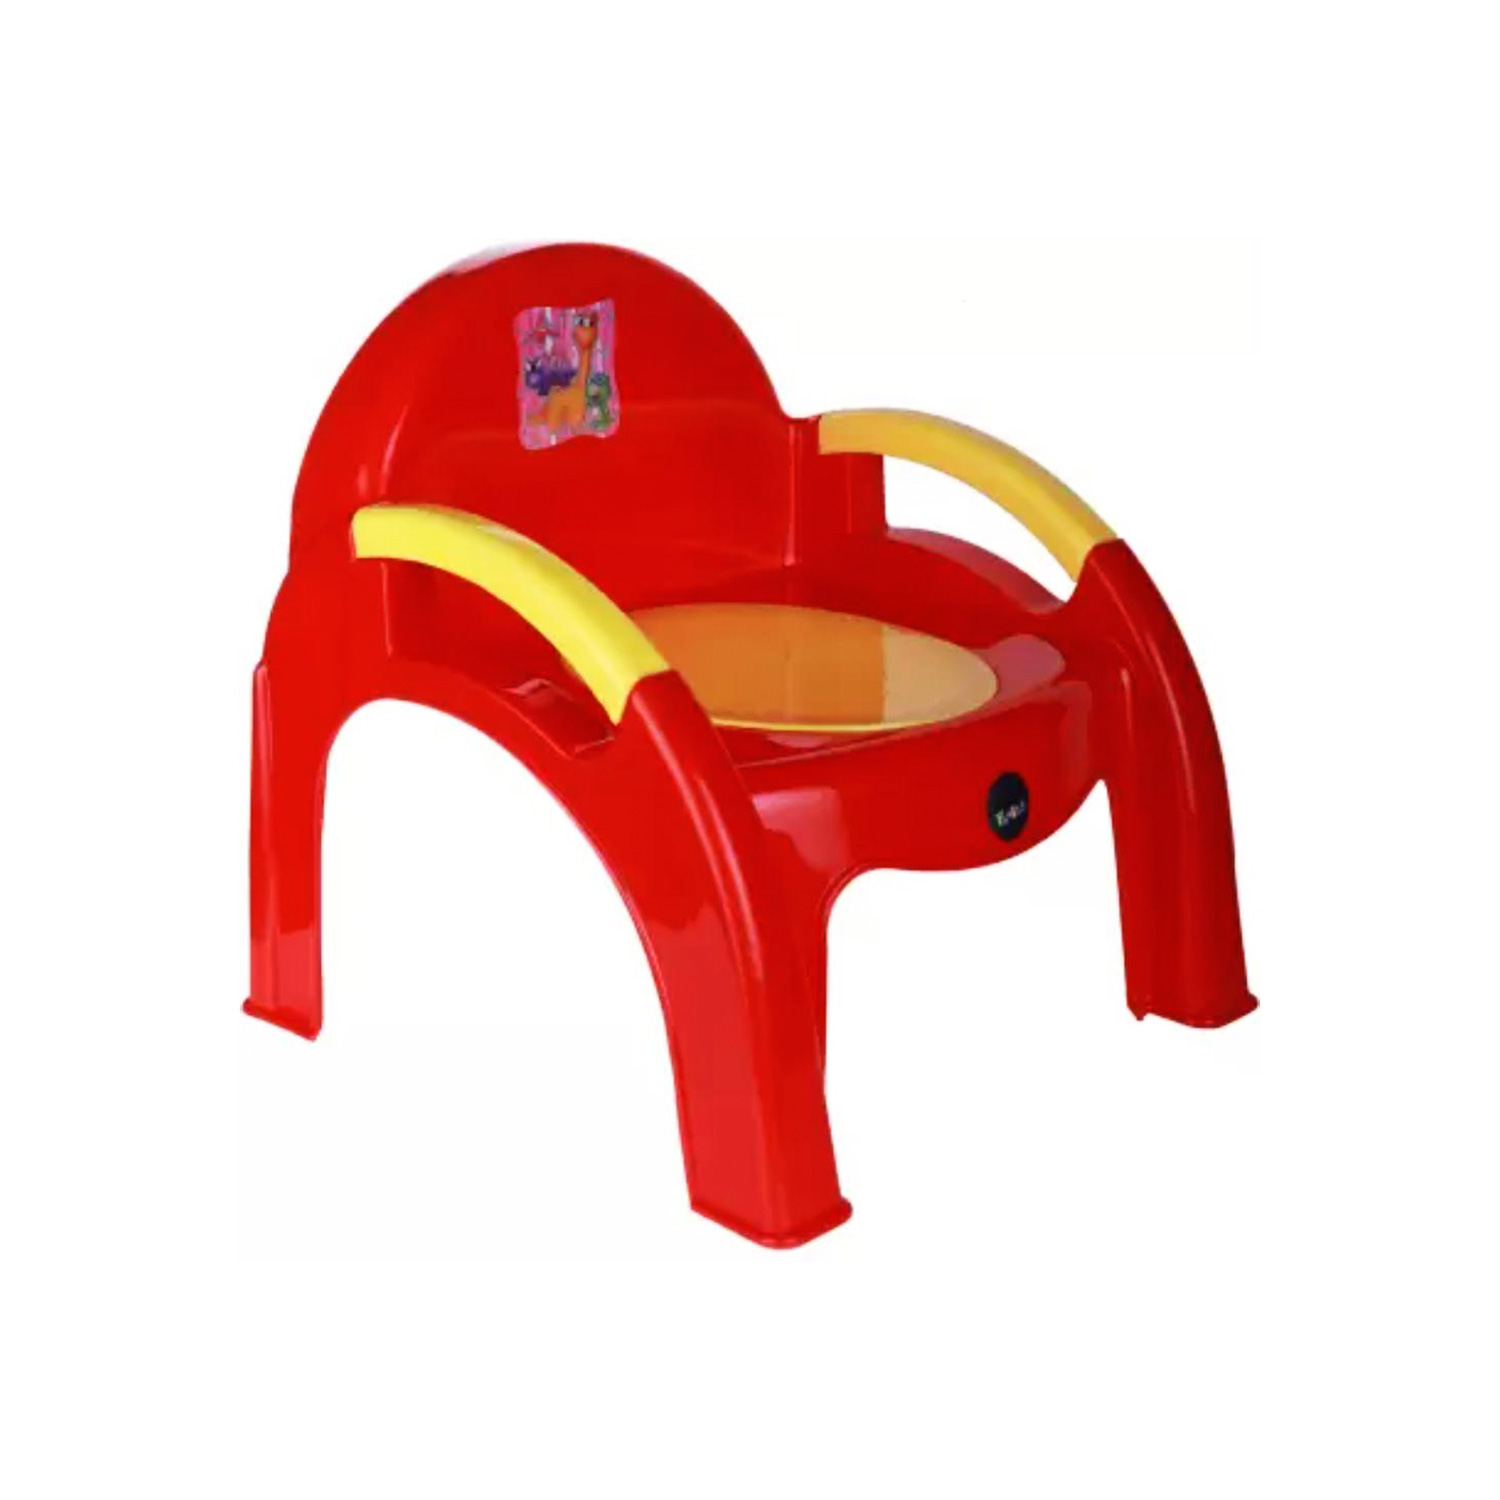 Baby_poty_Red_chair-2